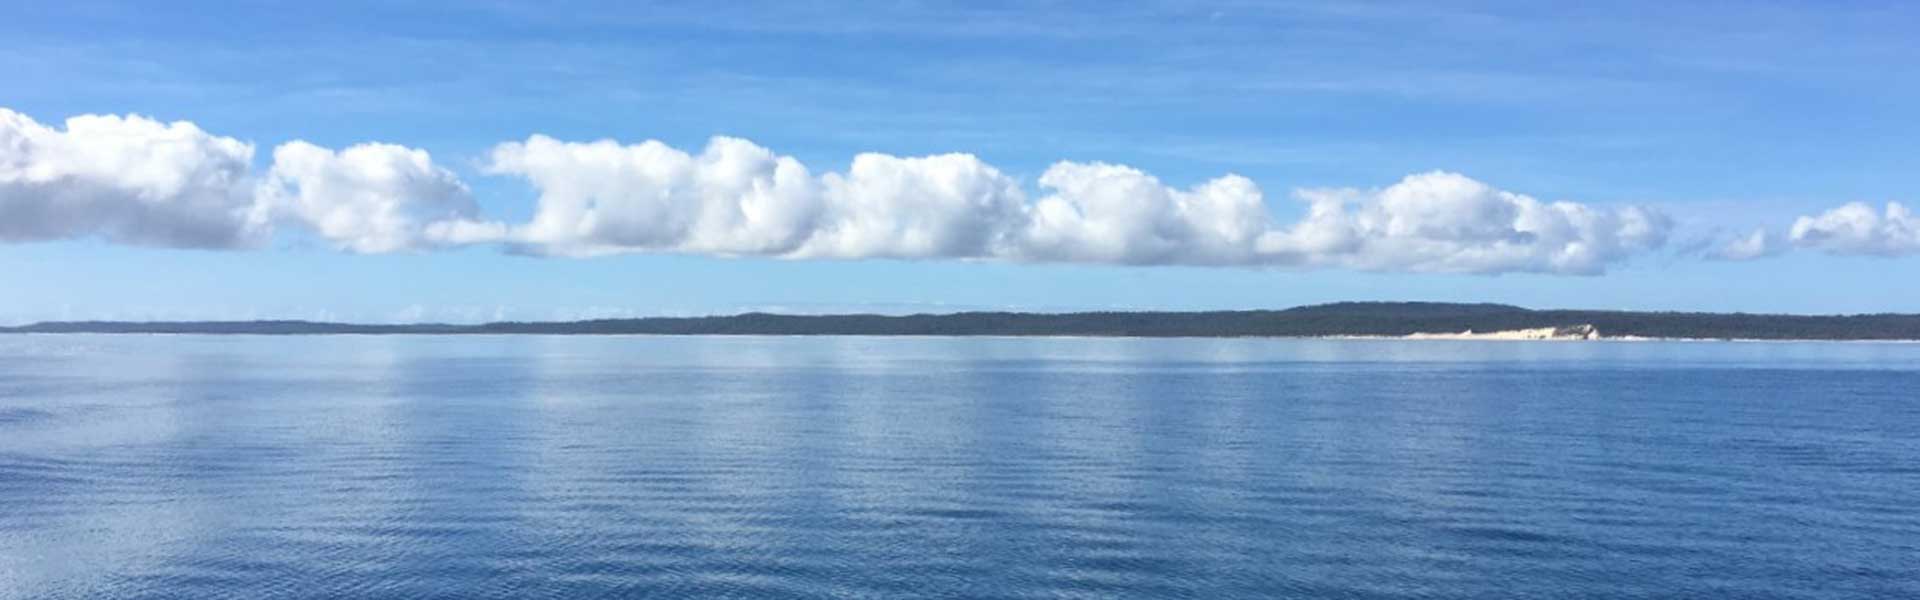 distant island with ocean in the forefront and white clouds in a blue sky 